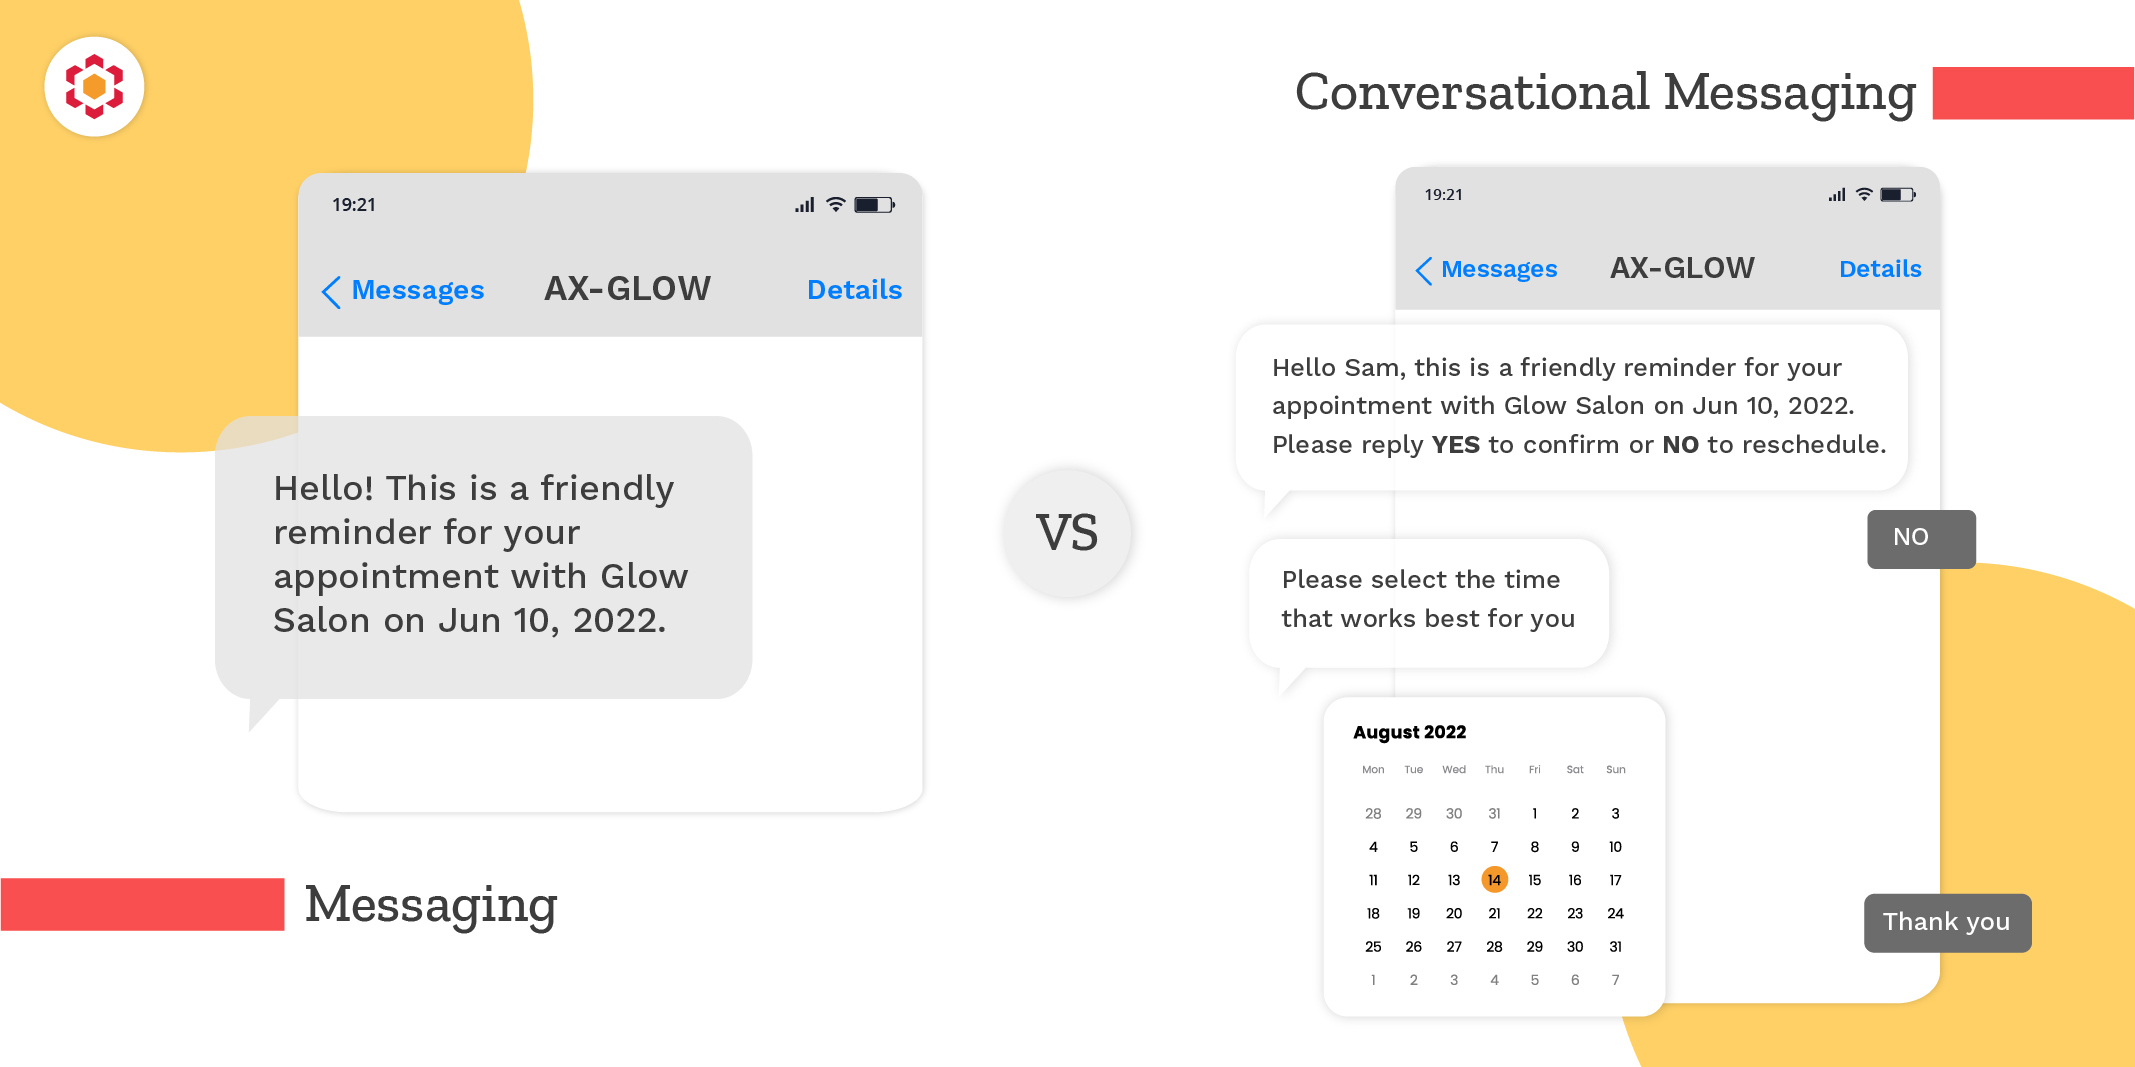 Conversational Messages vs one-way messages